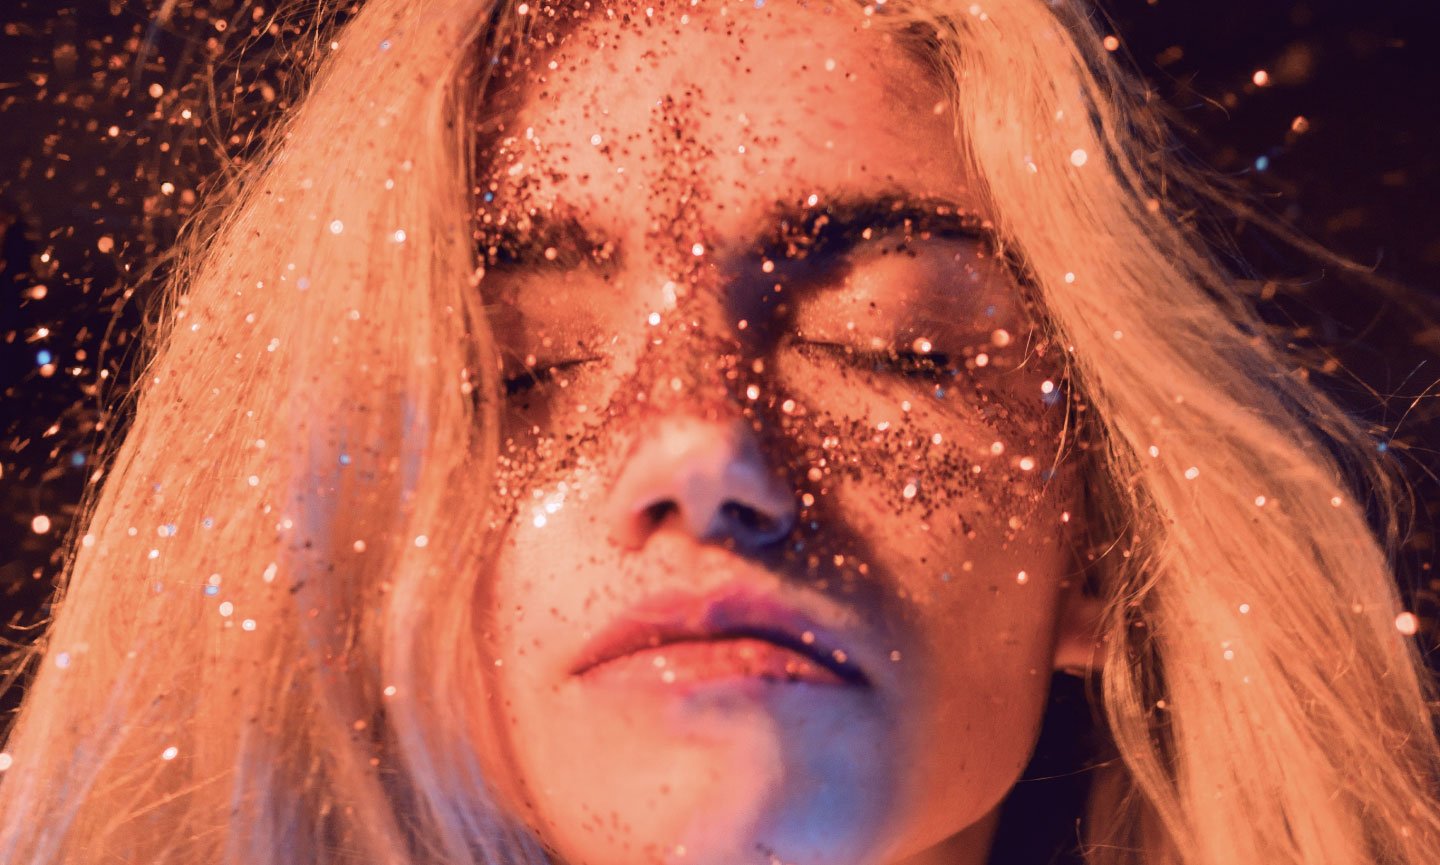 Face of a young woman with sparkles, eyes closed, representing receiving healing magic